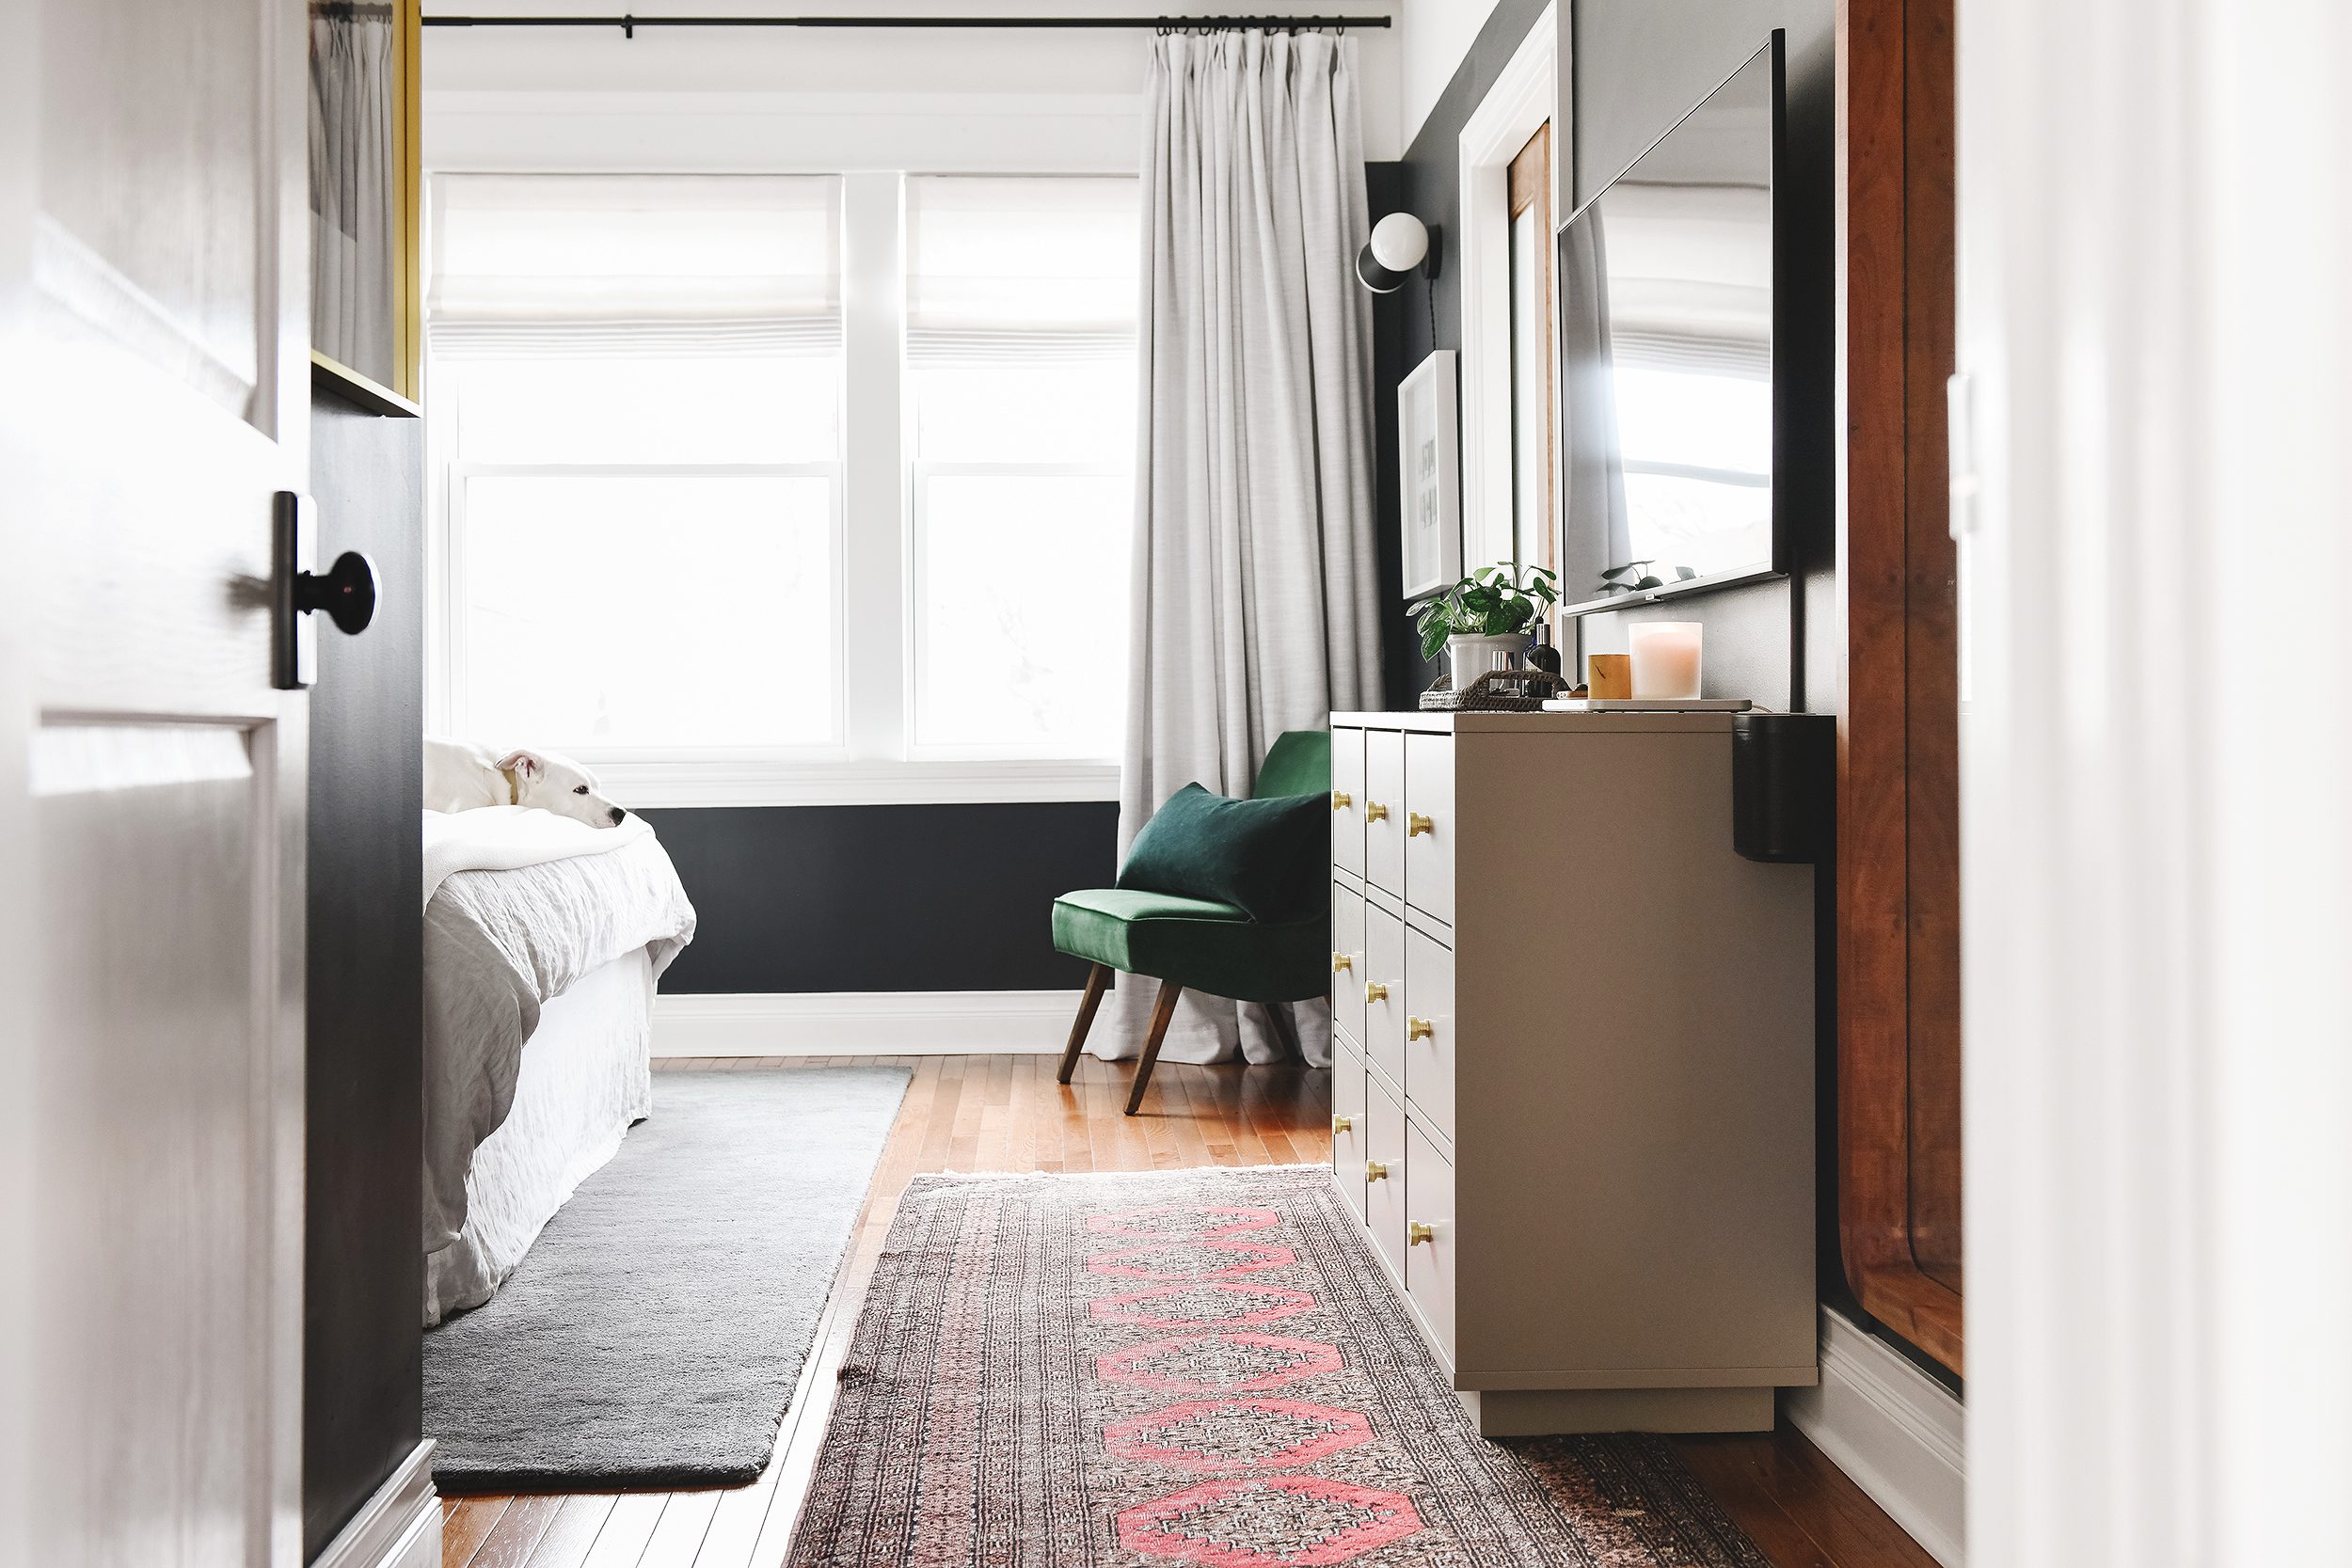 primary bedroom after // via Yellow Brick Home